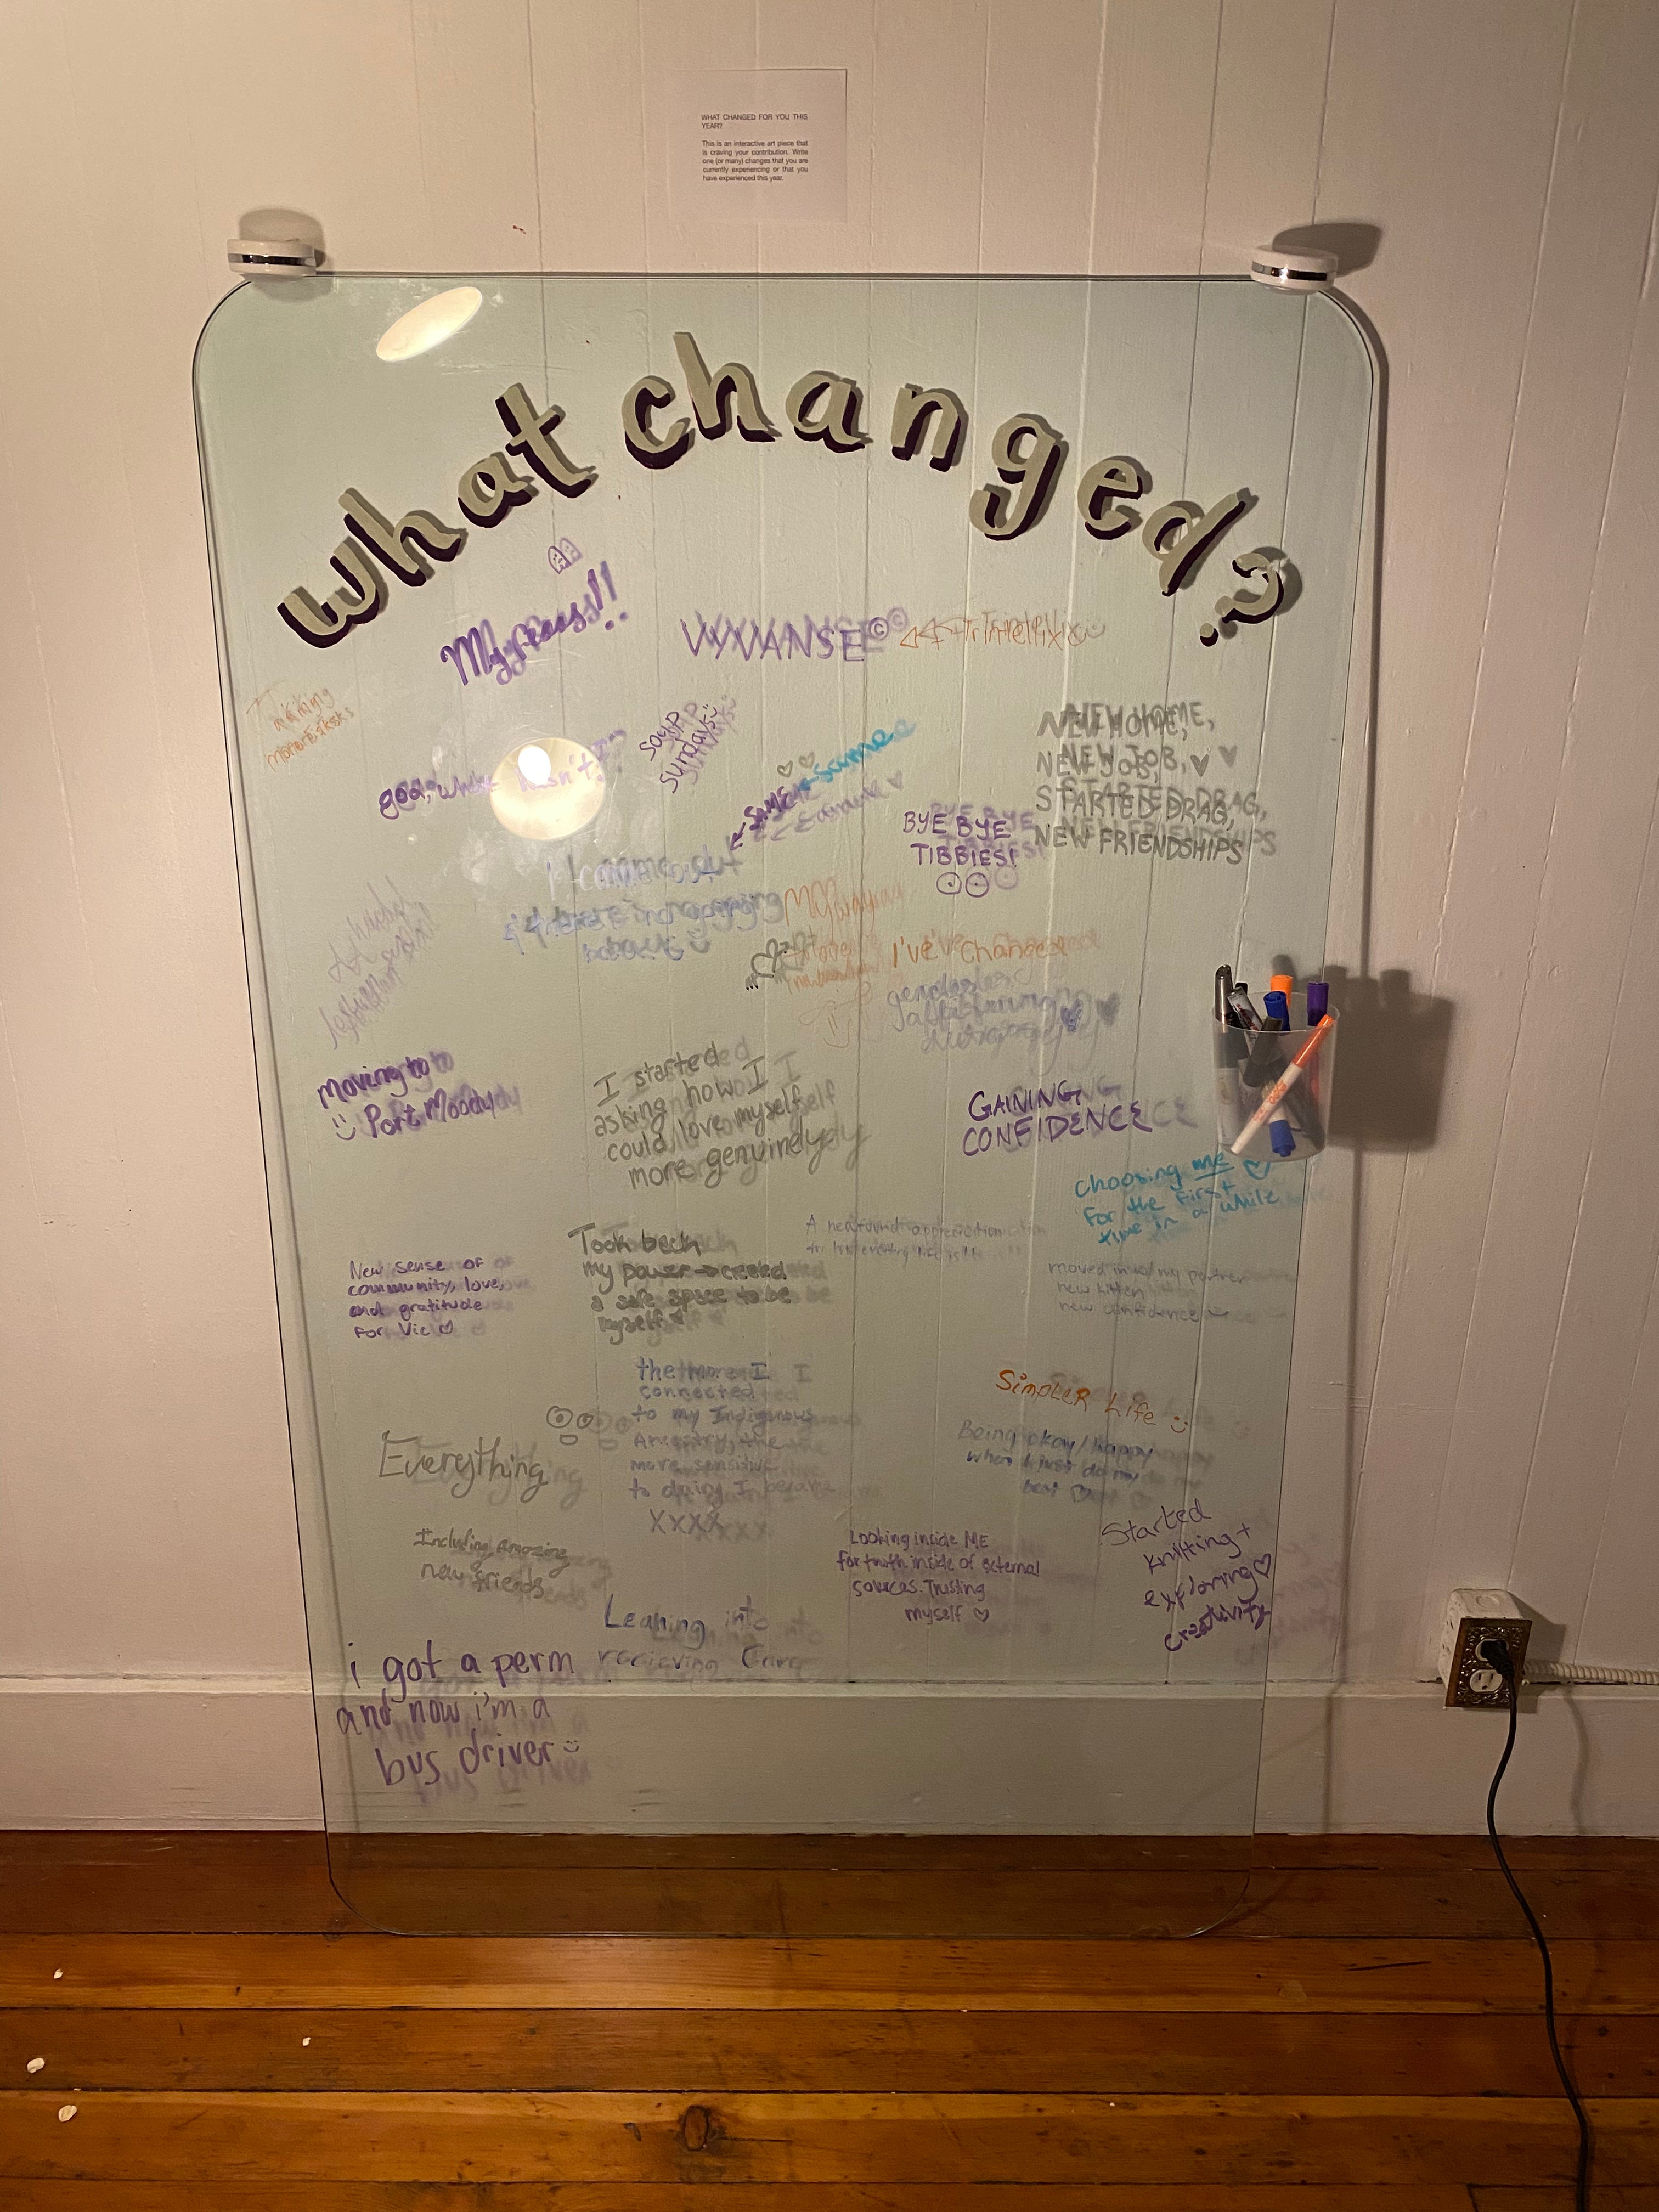 The interactive art piece at the event is a large glass surface leaning against a wall, with the words "What changed?" painted on. Guests have used markers to write down things that changed for them in the past year and have filled up the glass surface.